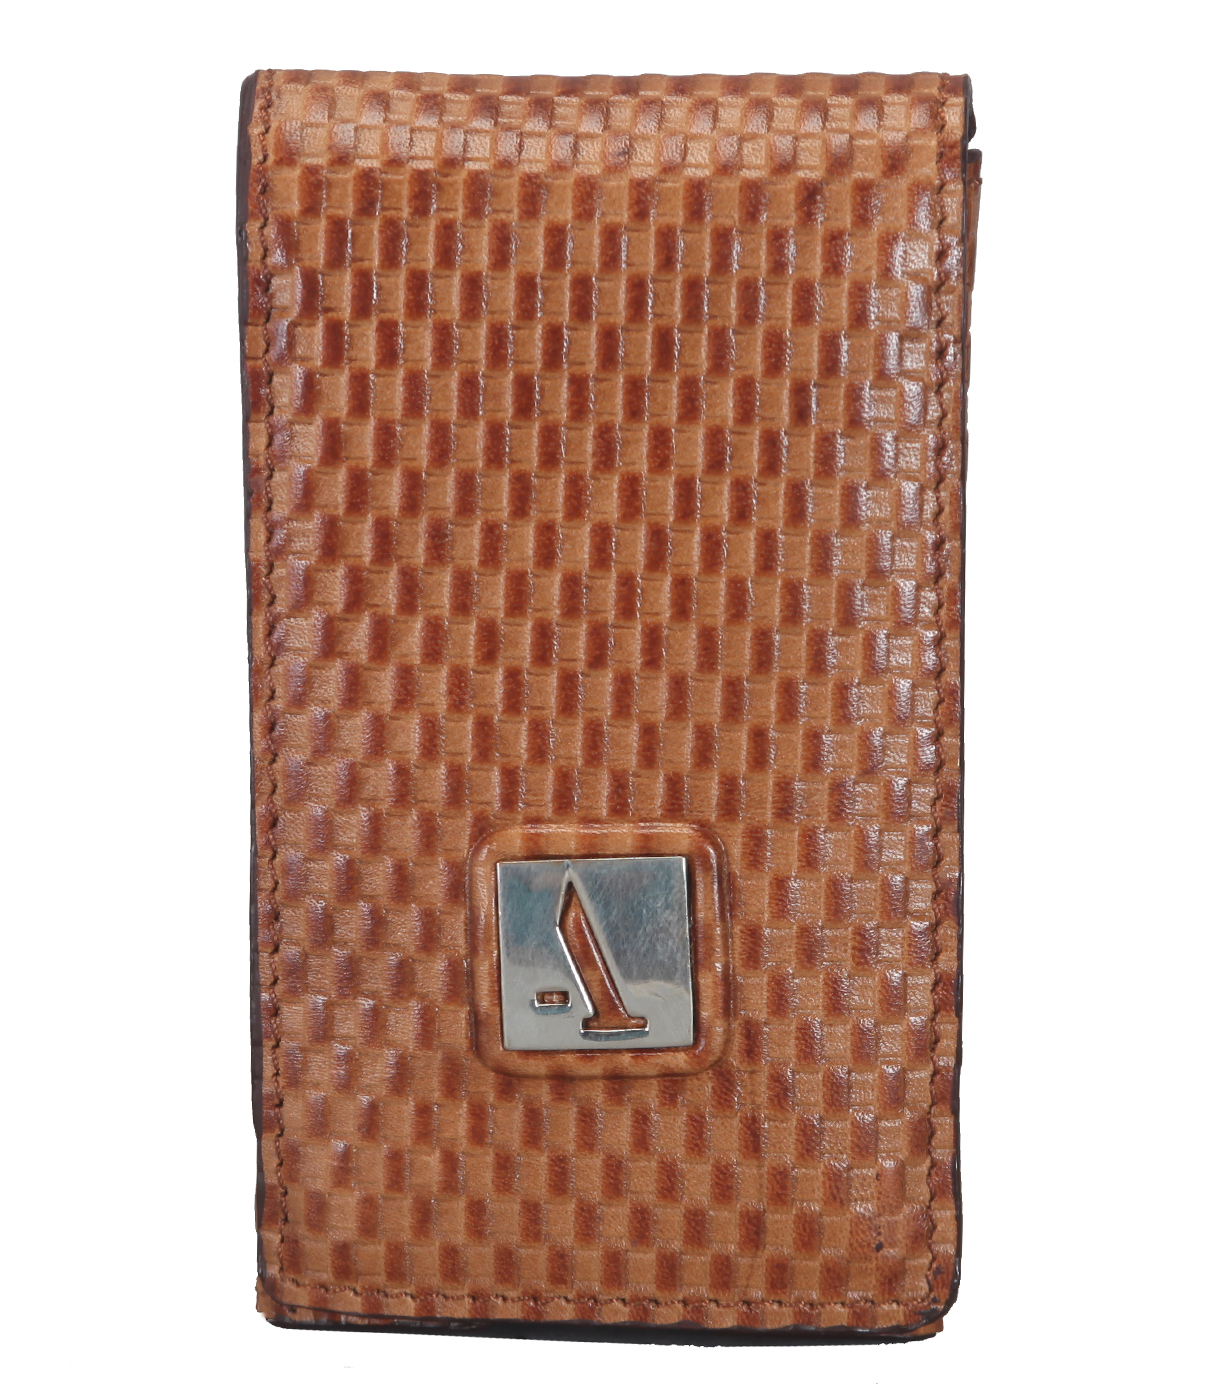 W260--Keyholder with space for electronic entry card in Genuine Leather - Tan